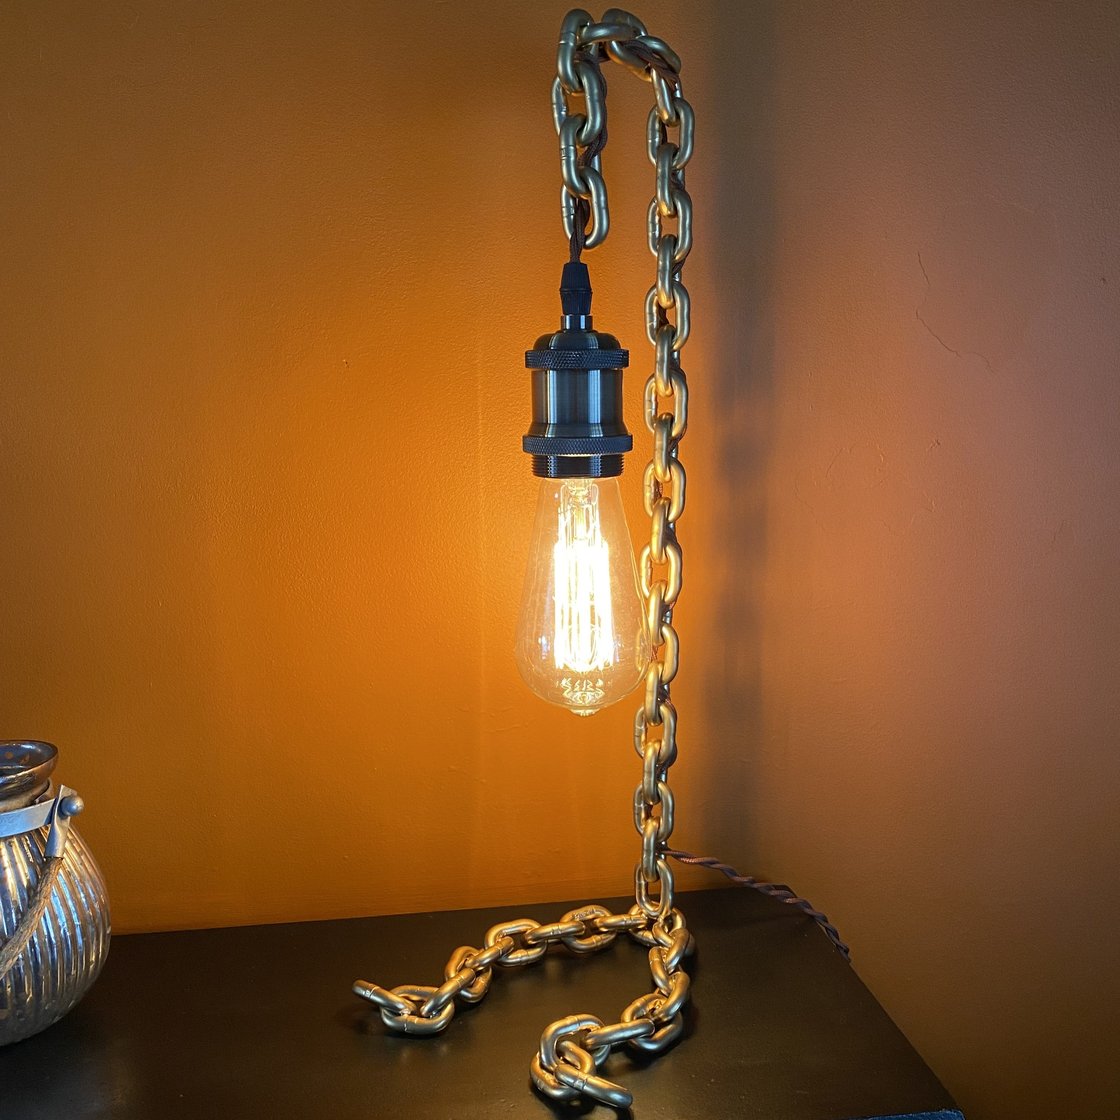 Products Handcrafted Industrial Chain Desk Lamp, Living Room Lighting, Industrial Design Homeware, Urban Industrial Lighting, Unique Desk Lamp Lighting